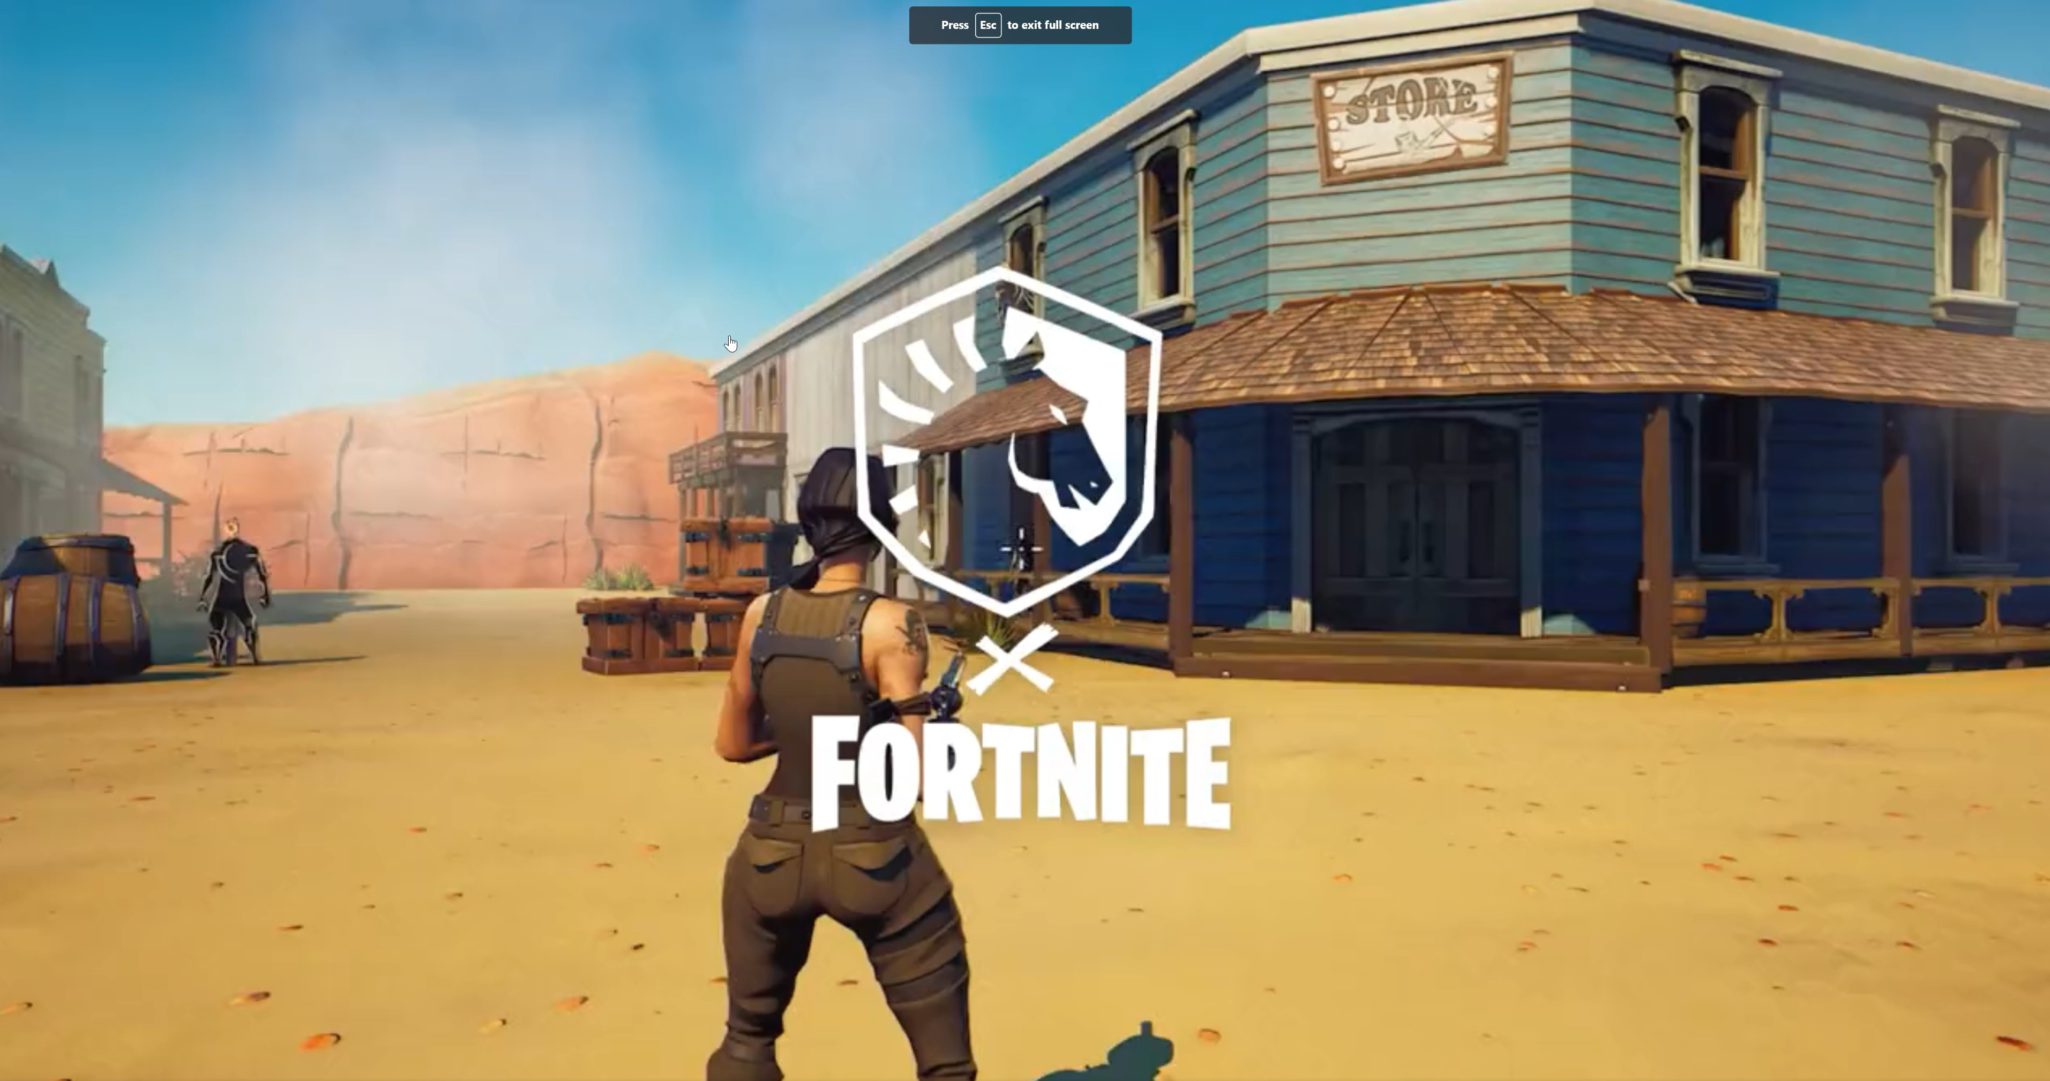 Fortnite The Nindo 2022 Guide: How to Earn Badges, Unlock Naruto